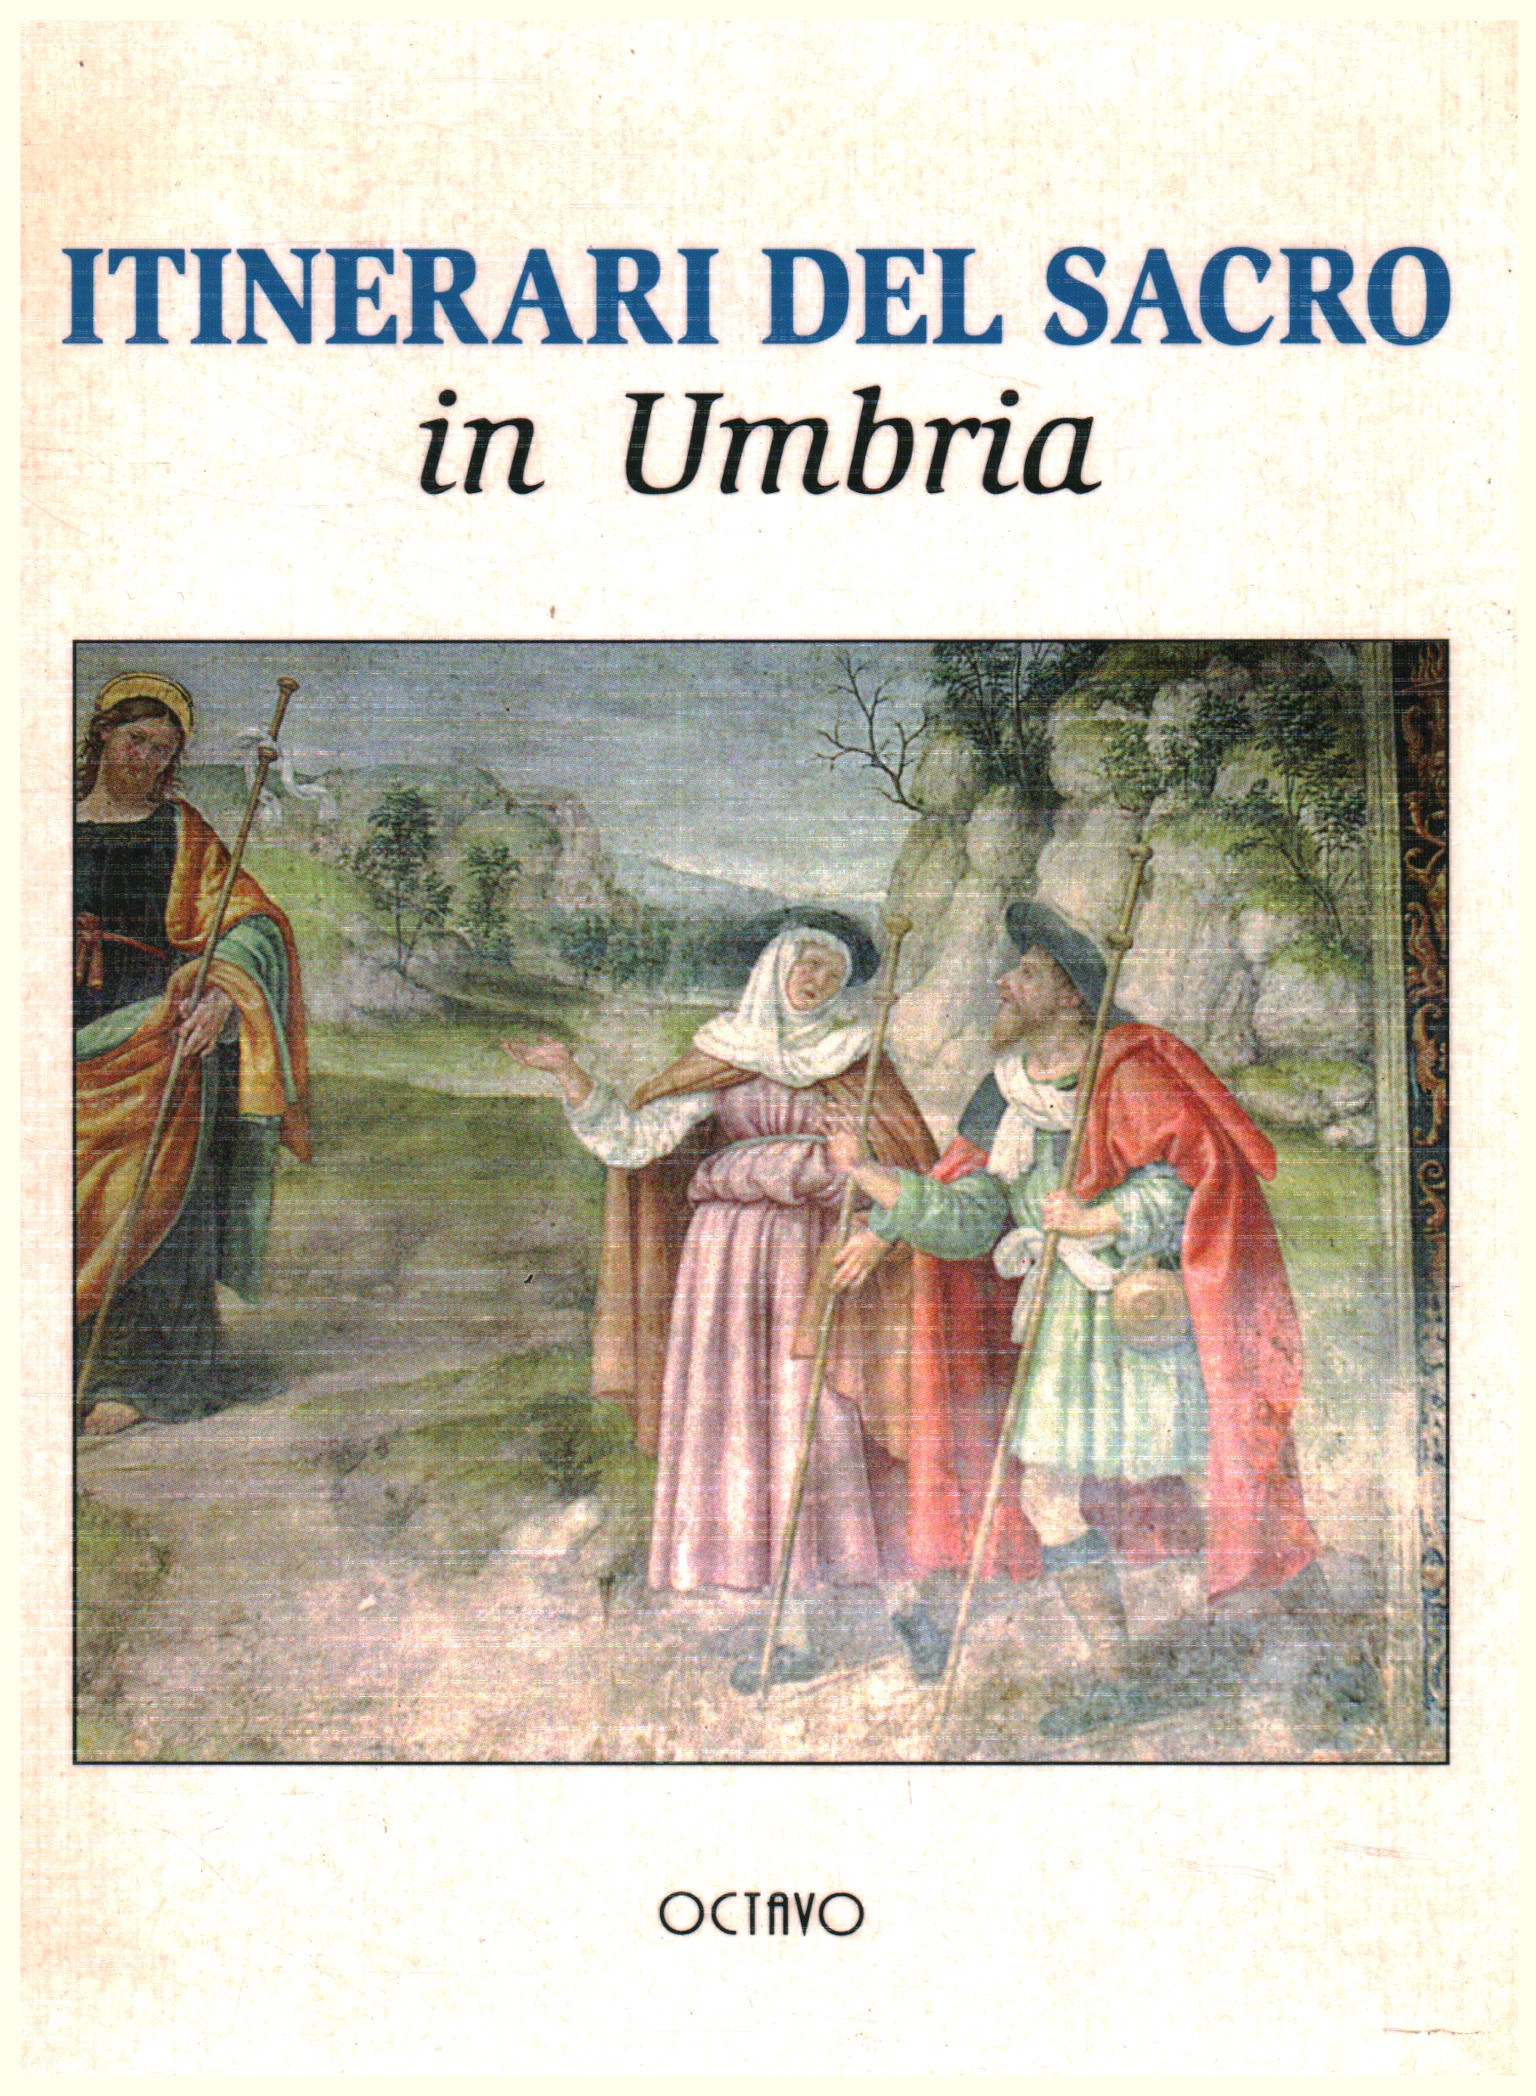 Itineraries of the sacred in Umbria